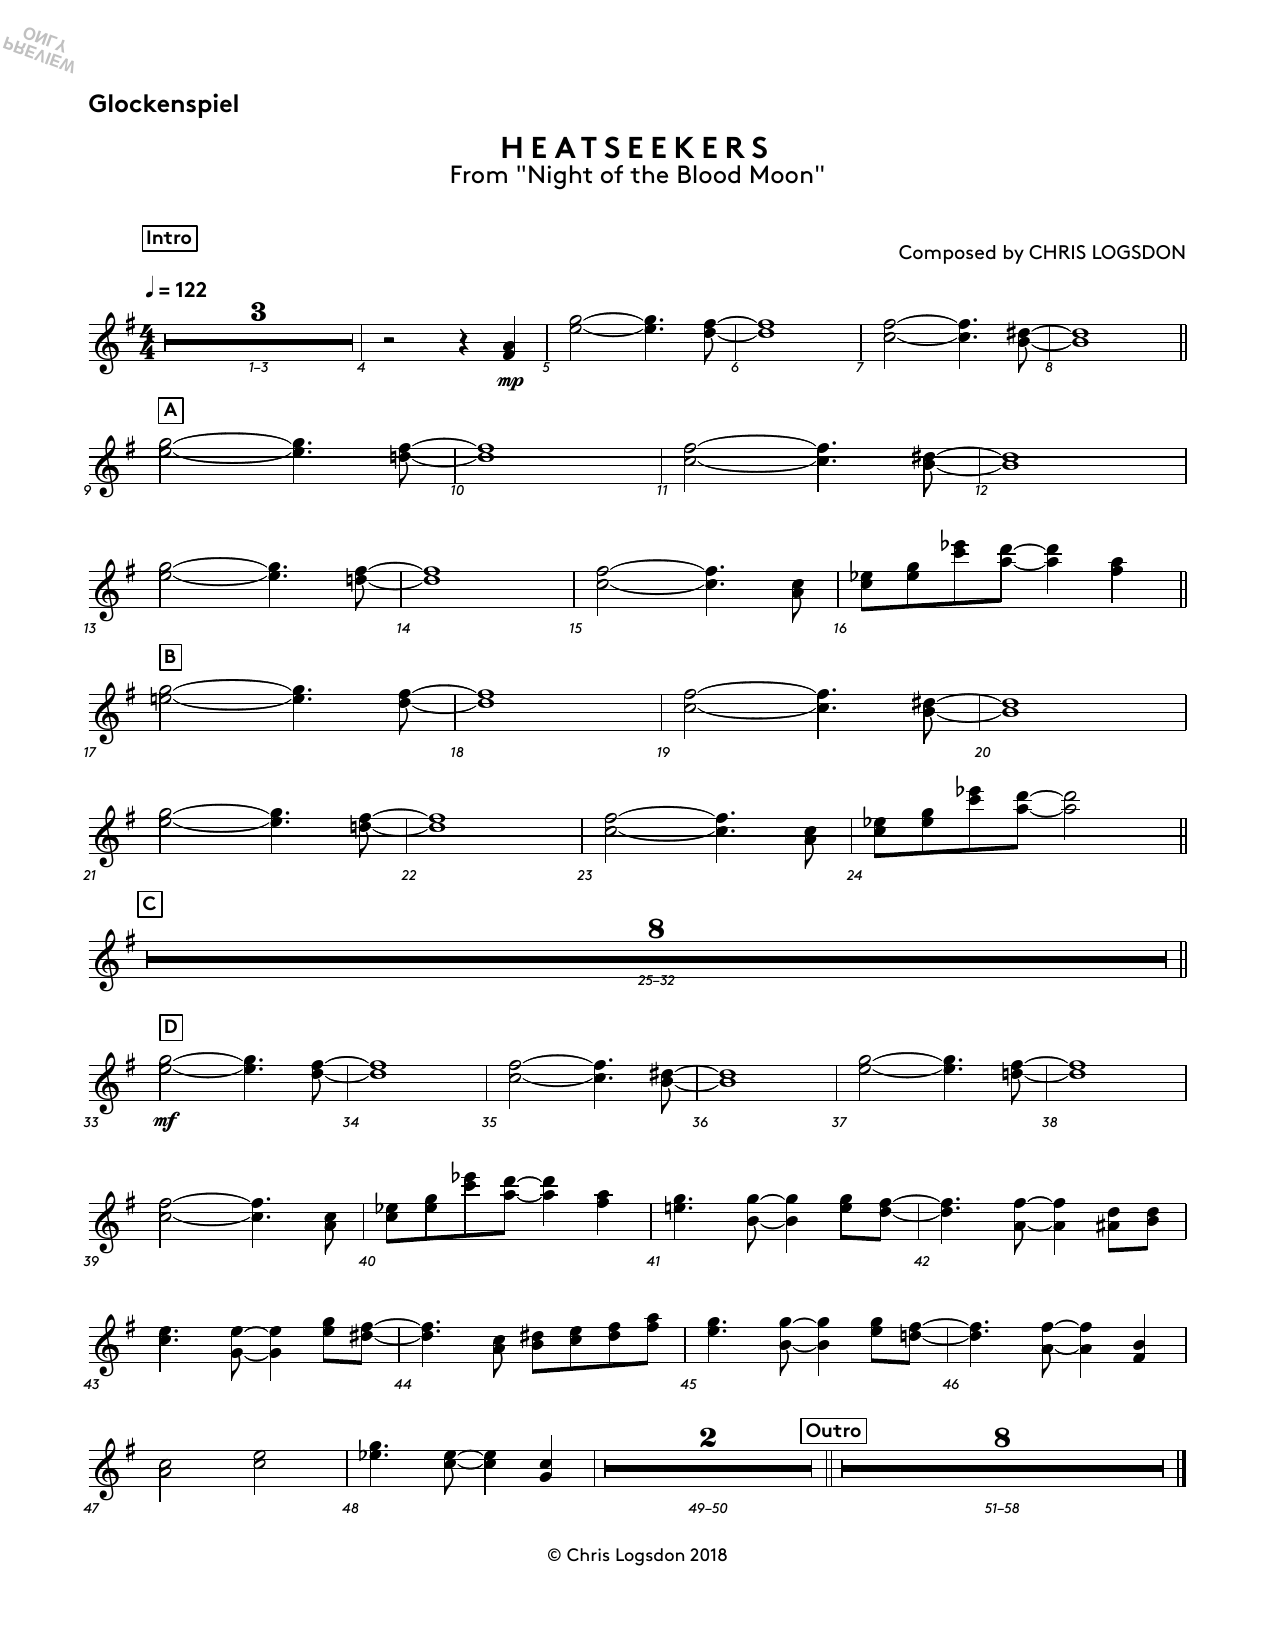 Chris Logsdon Heatseekers (from Night of the Blood Moon) - Glockenspiel sheet music preview music notes and score for Performance Ensemble including 1 page(s)